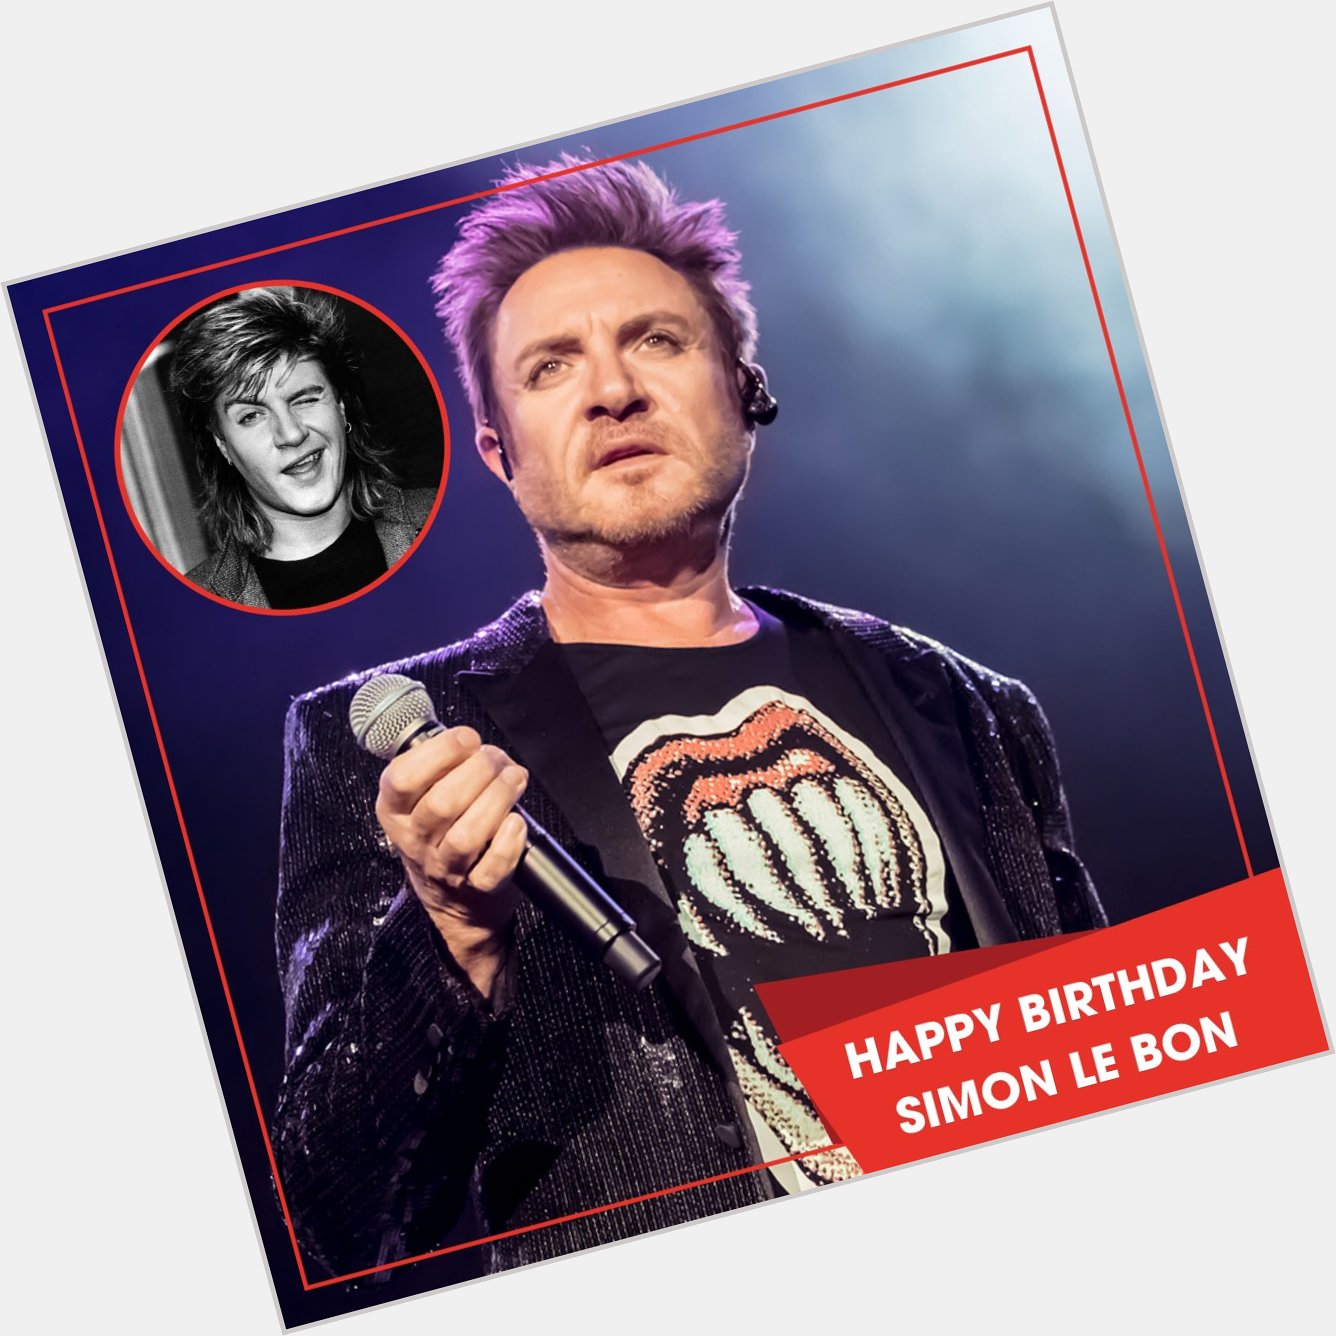 Wishing Simon Le Bon a happy 62nd birthday! What\s your favourite Duran Duran track? 